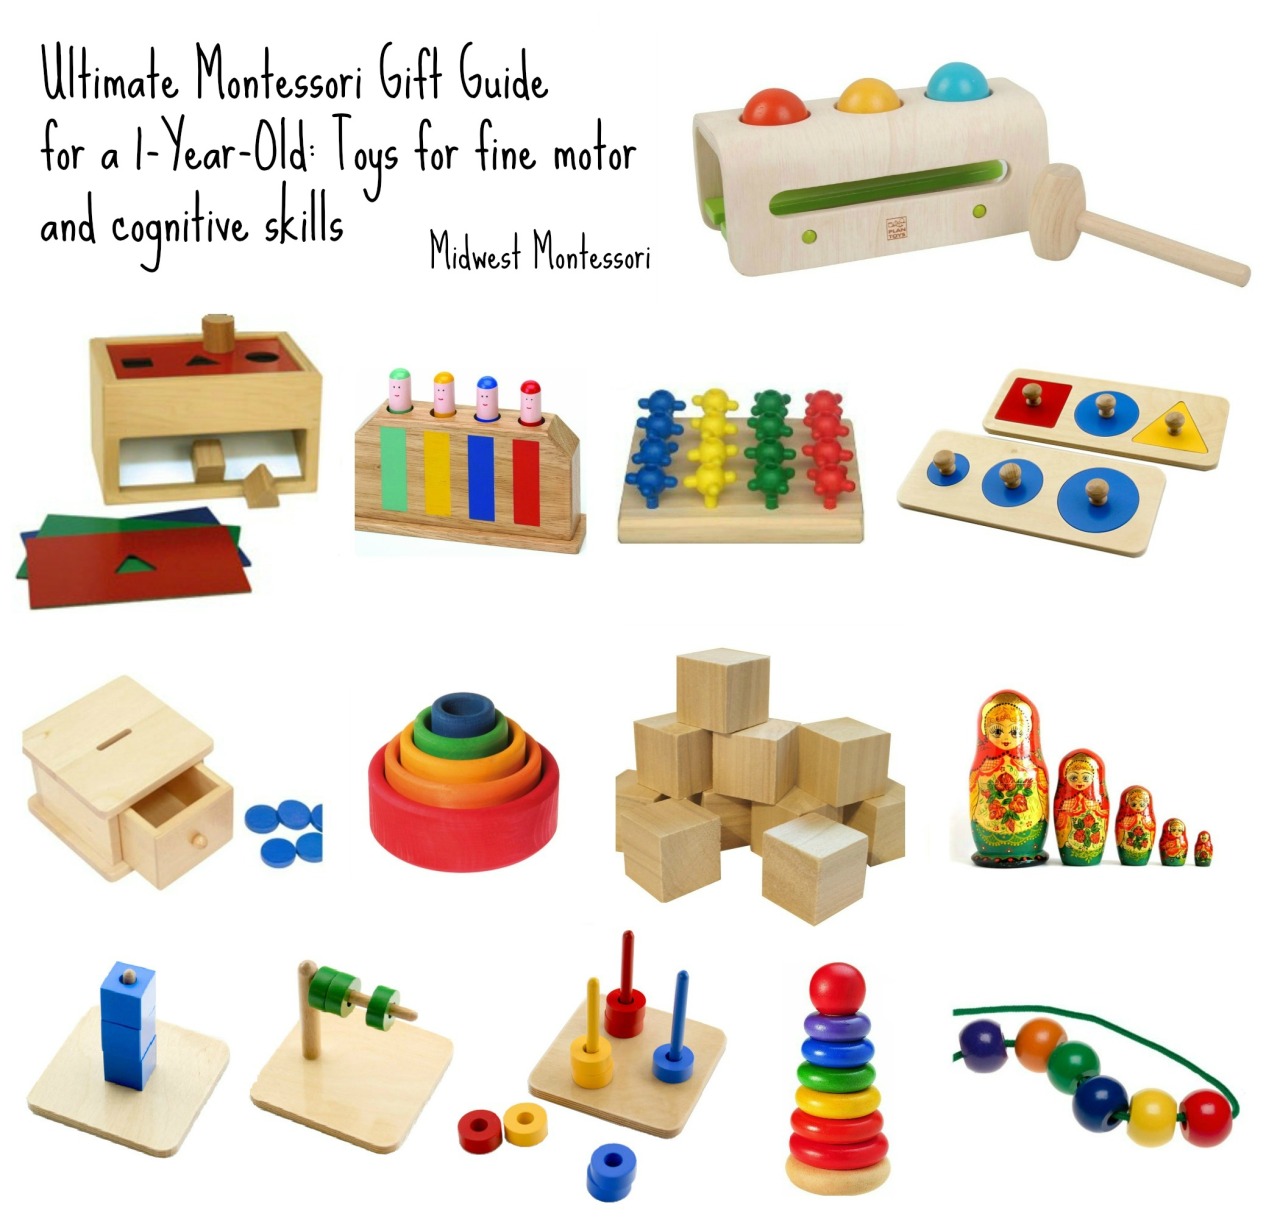 Midwest Montessori — Ultimate Montessori Gift Guide for a One-Year-Old